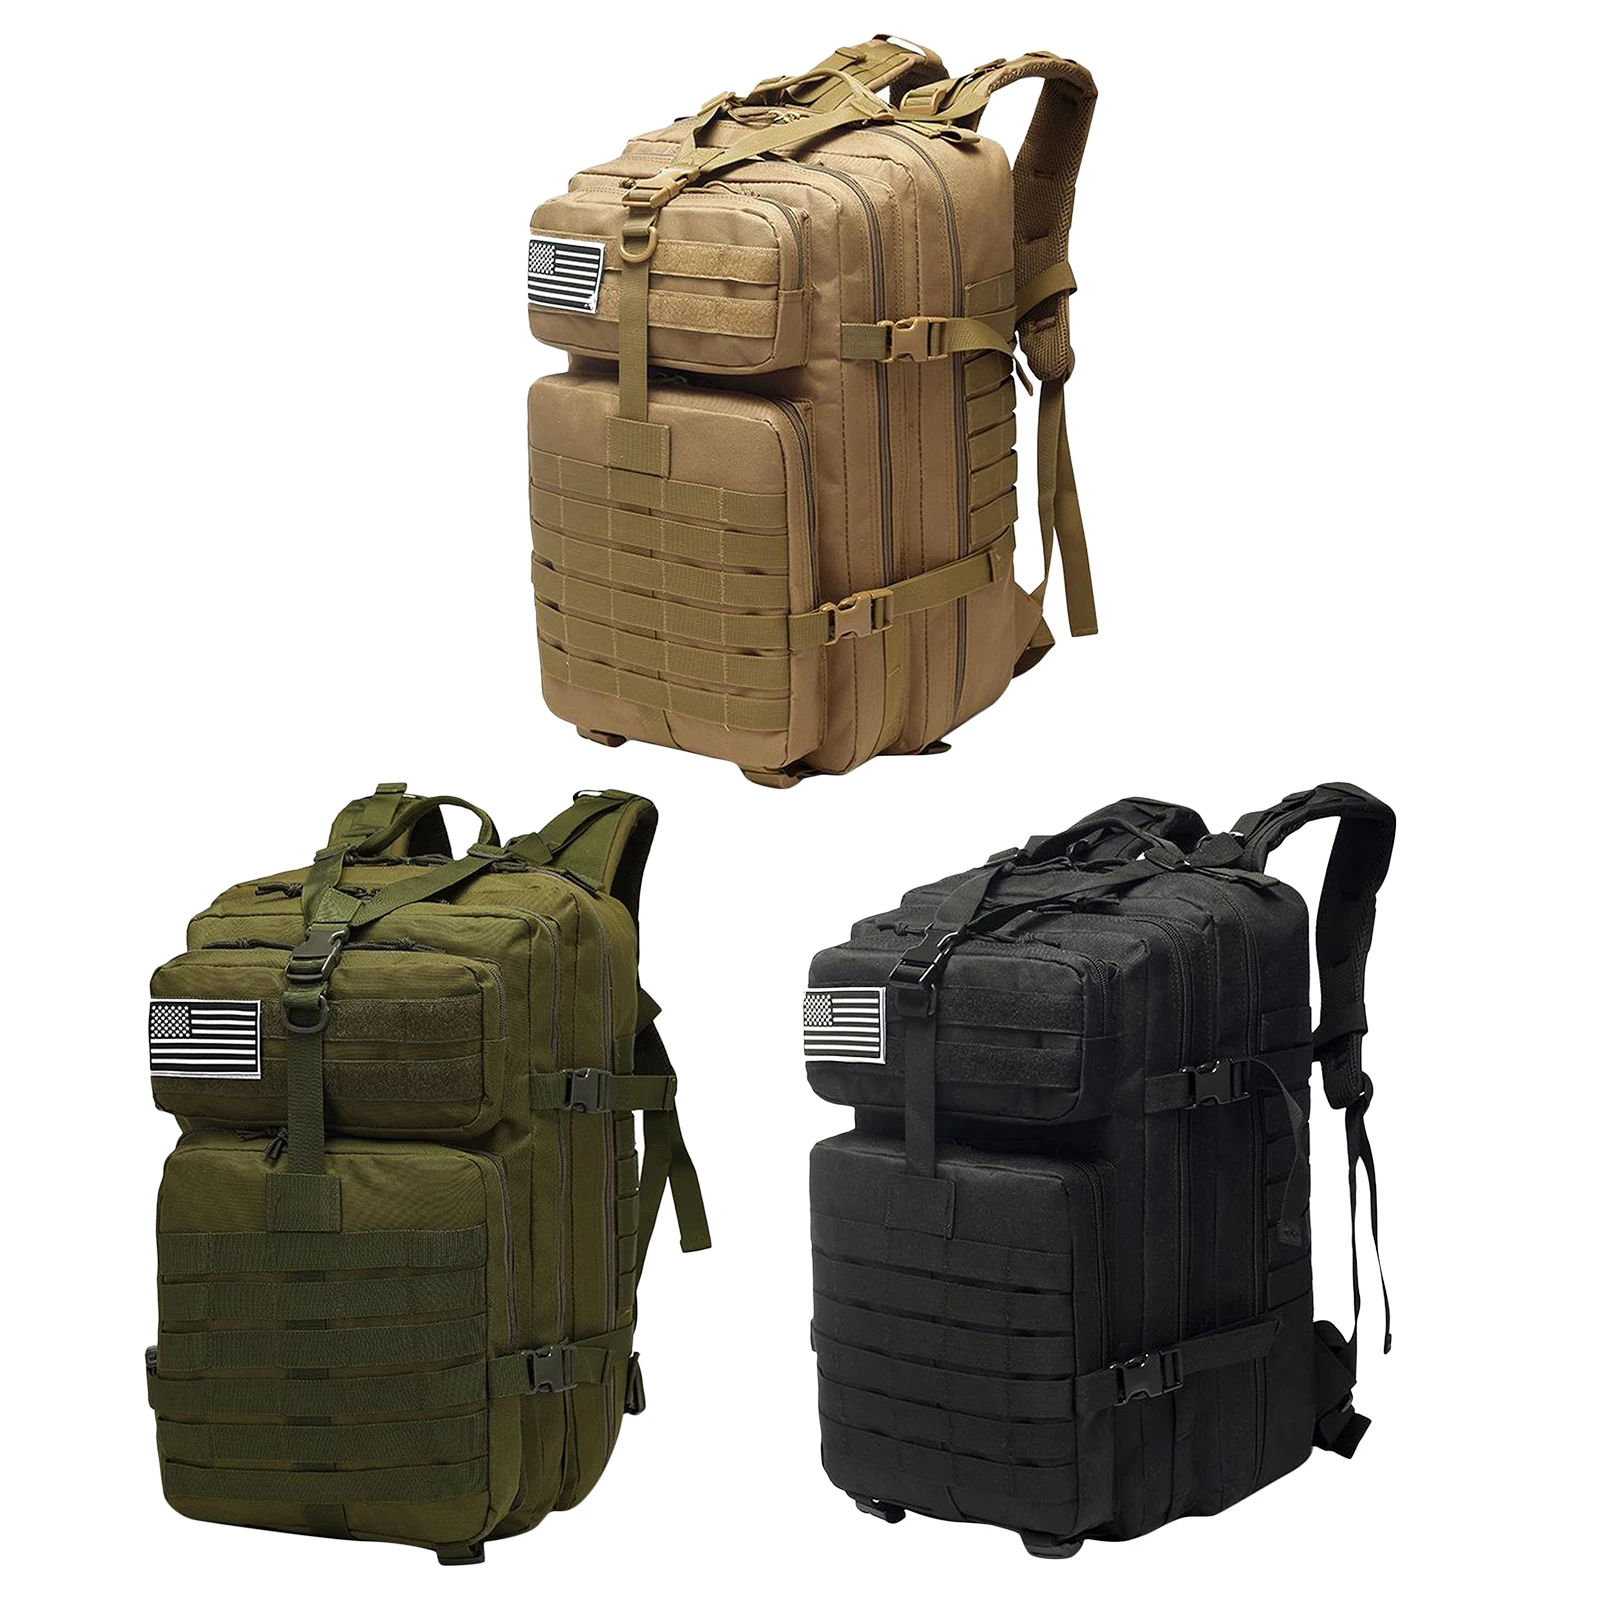 50L Tactical Military Backpack Army Assault Pack Built-up Bag Outdoor Rucksack 